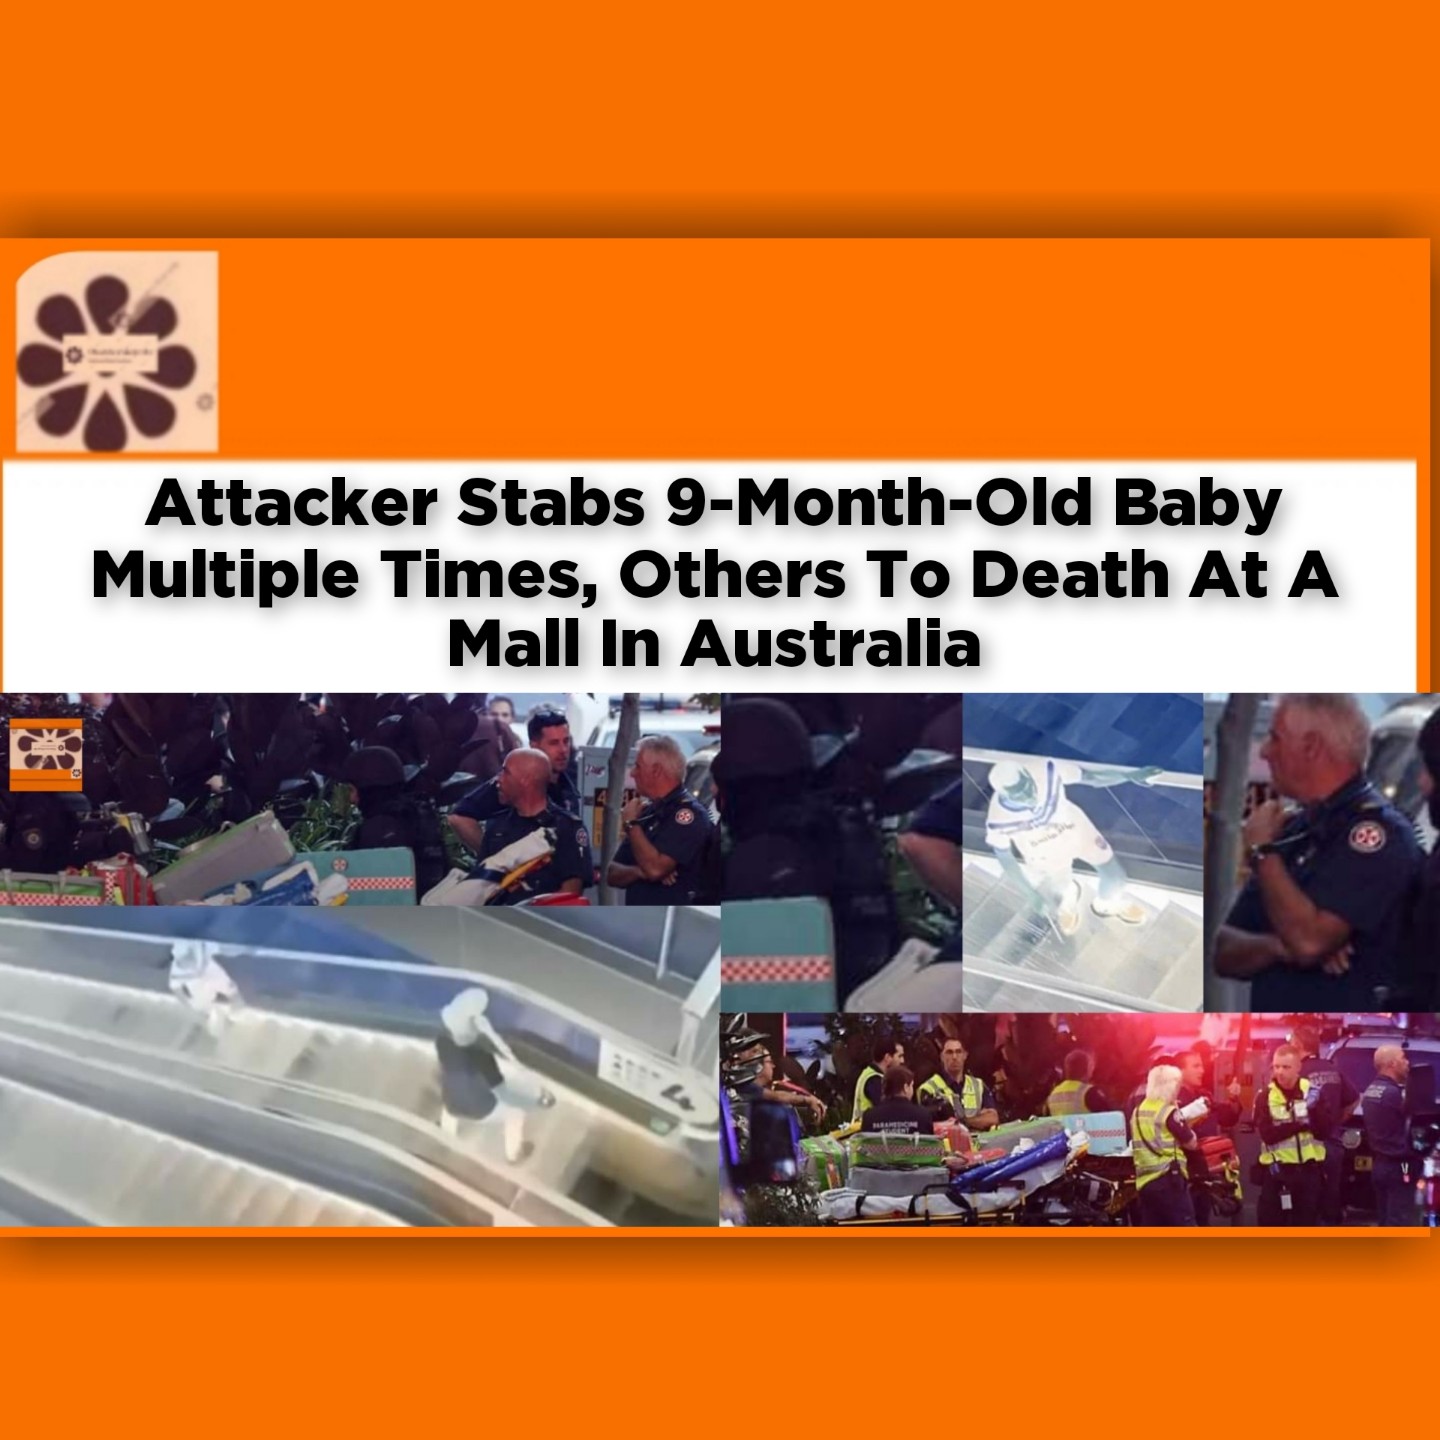 Attacker Stabs 9-Month-Old Baby Multiple Times, Others To Death At A Mall In Australia ~ OsazuwaAkonedo #Babagana